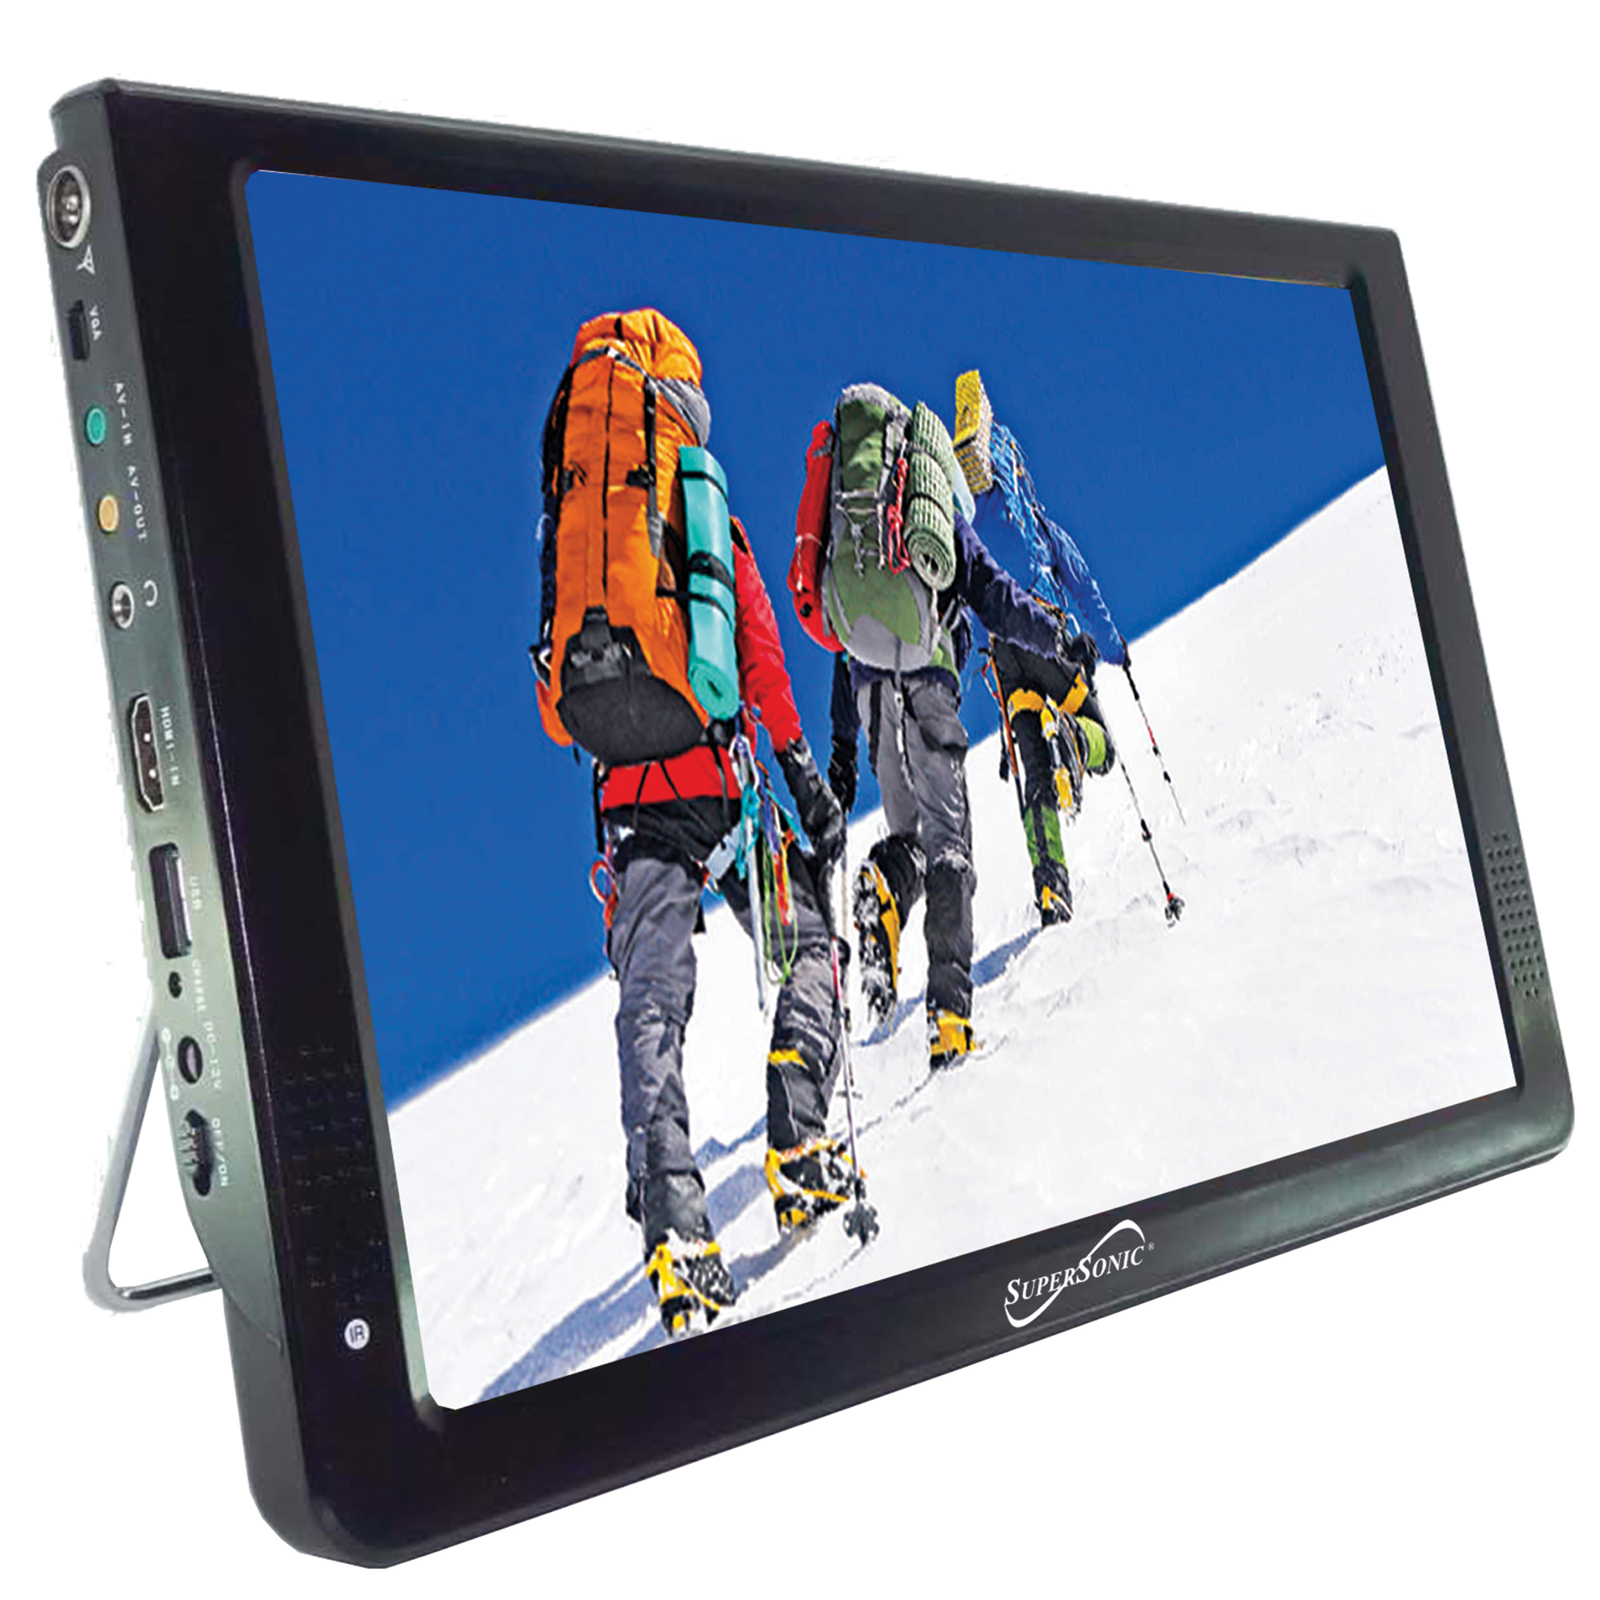 Supersonic 970105849M 12 in. Portable Digital LCD TV with USB & SD Inputs